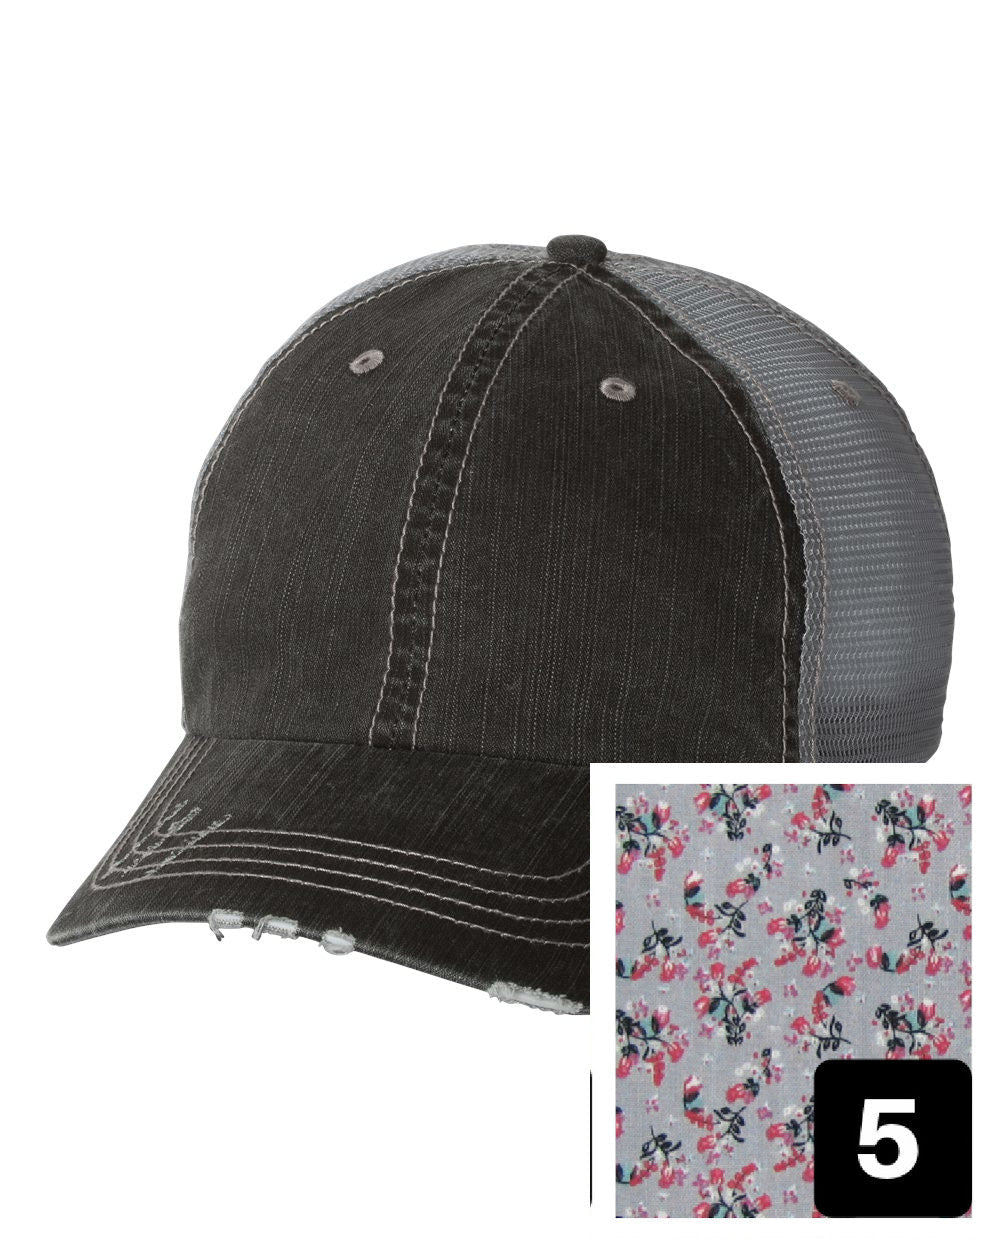 gray distressed trucker hat with purple and pink floral fabric state of Rhode Island